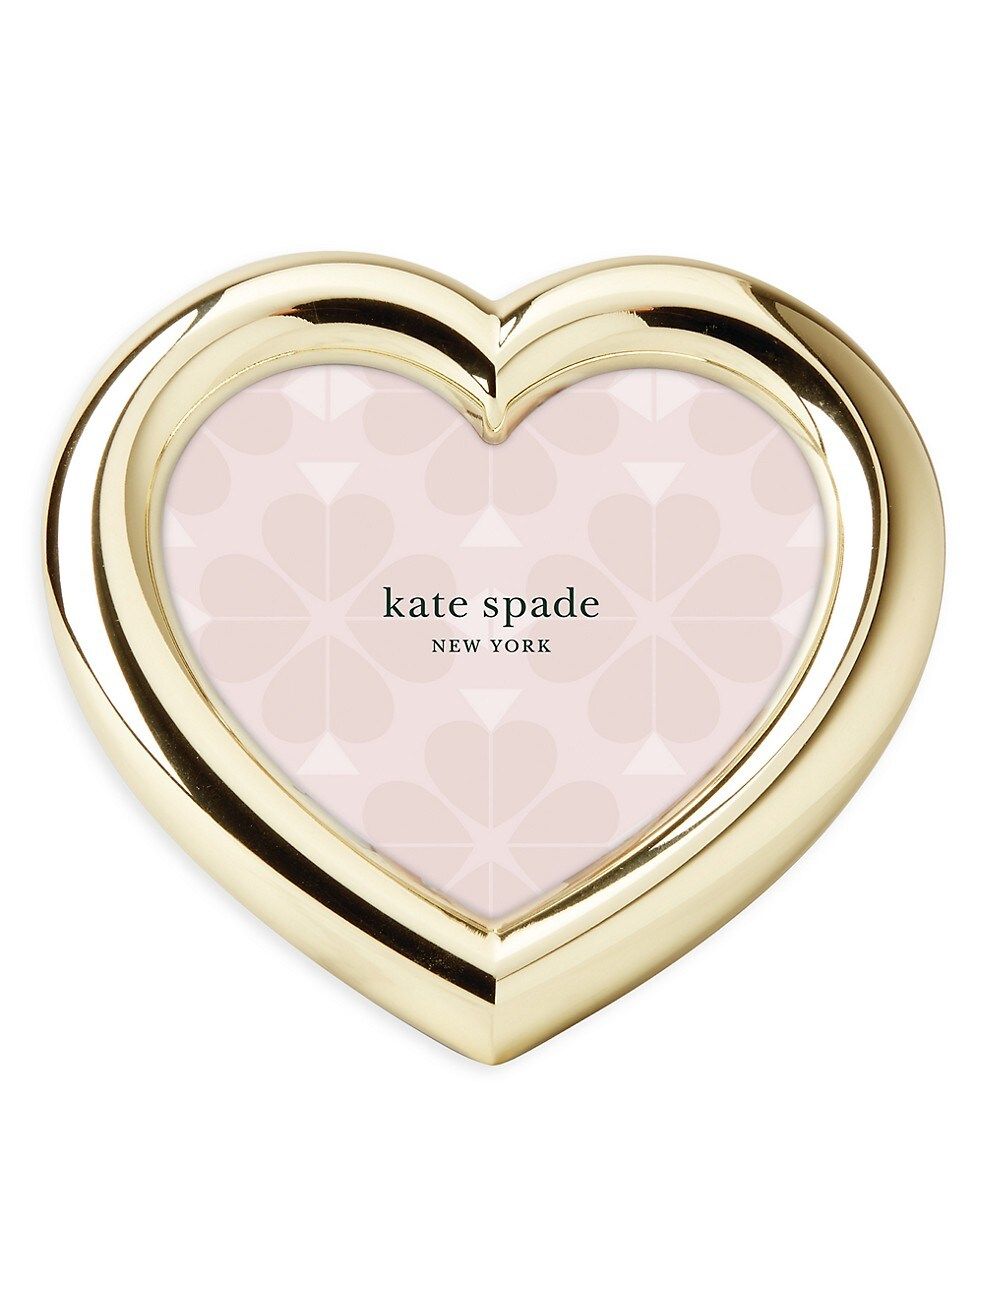 kate spade new york A Charmed Life Gold-Plated Heart Frame | Saks Fifth Avenue